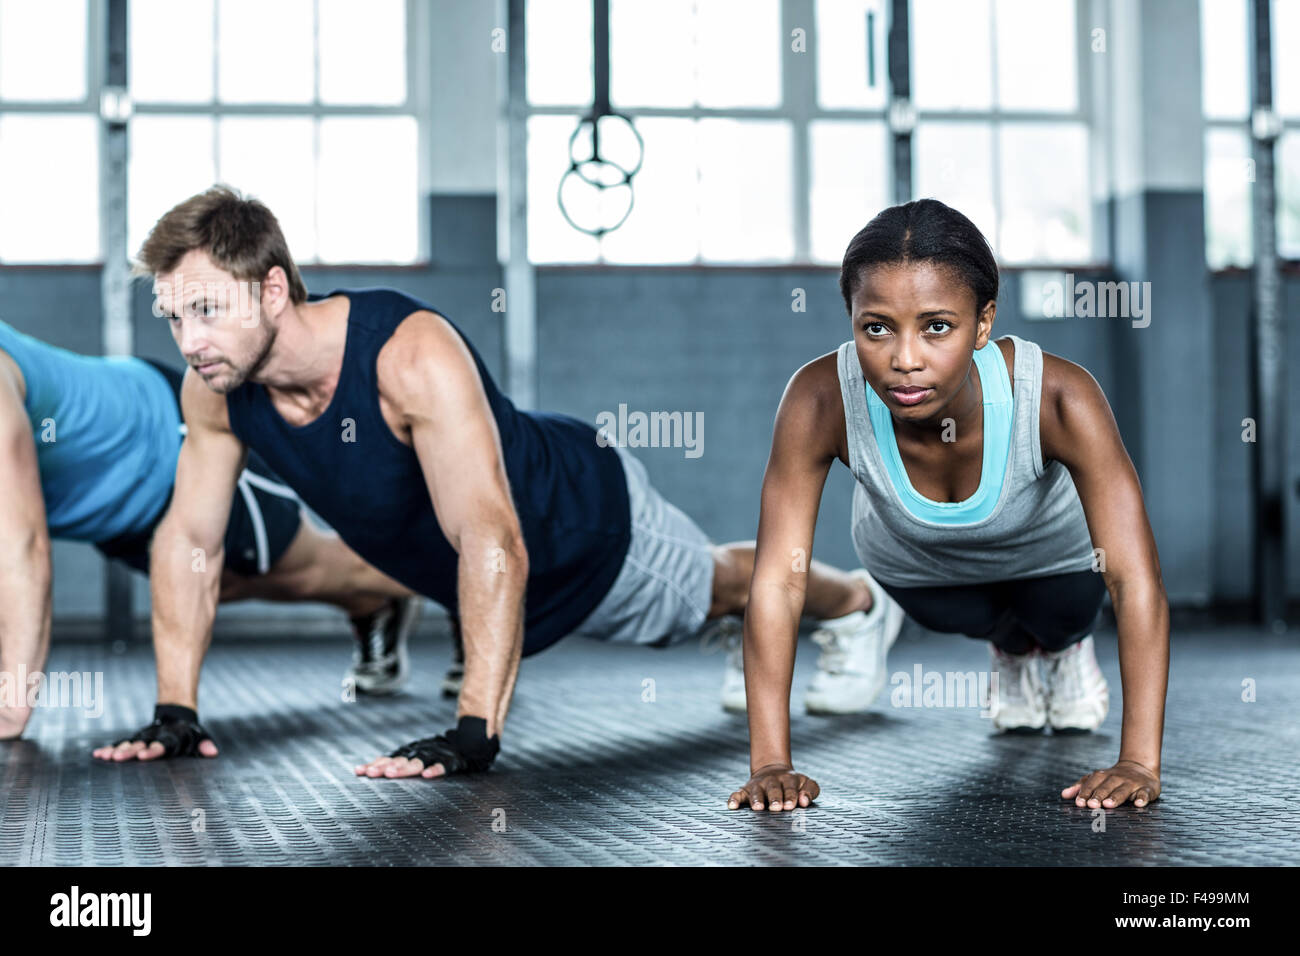 Fit people doing push up together Stock Photo